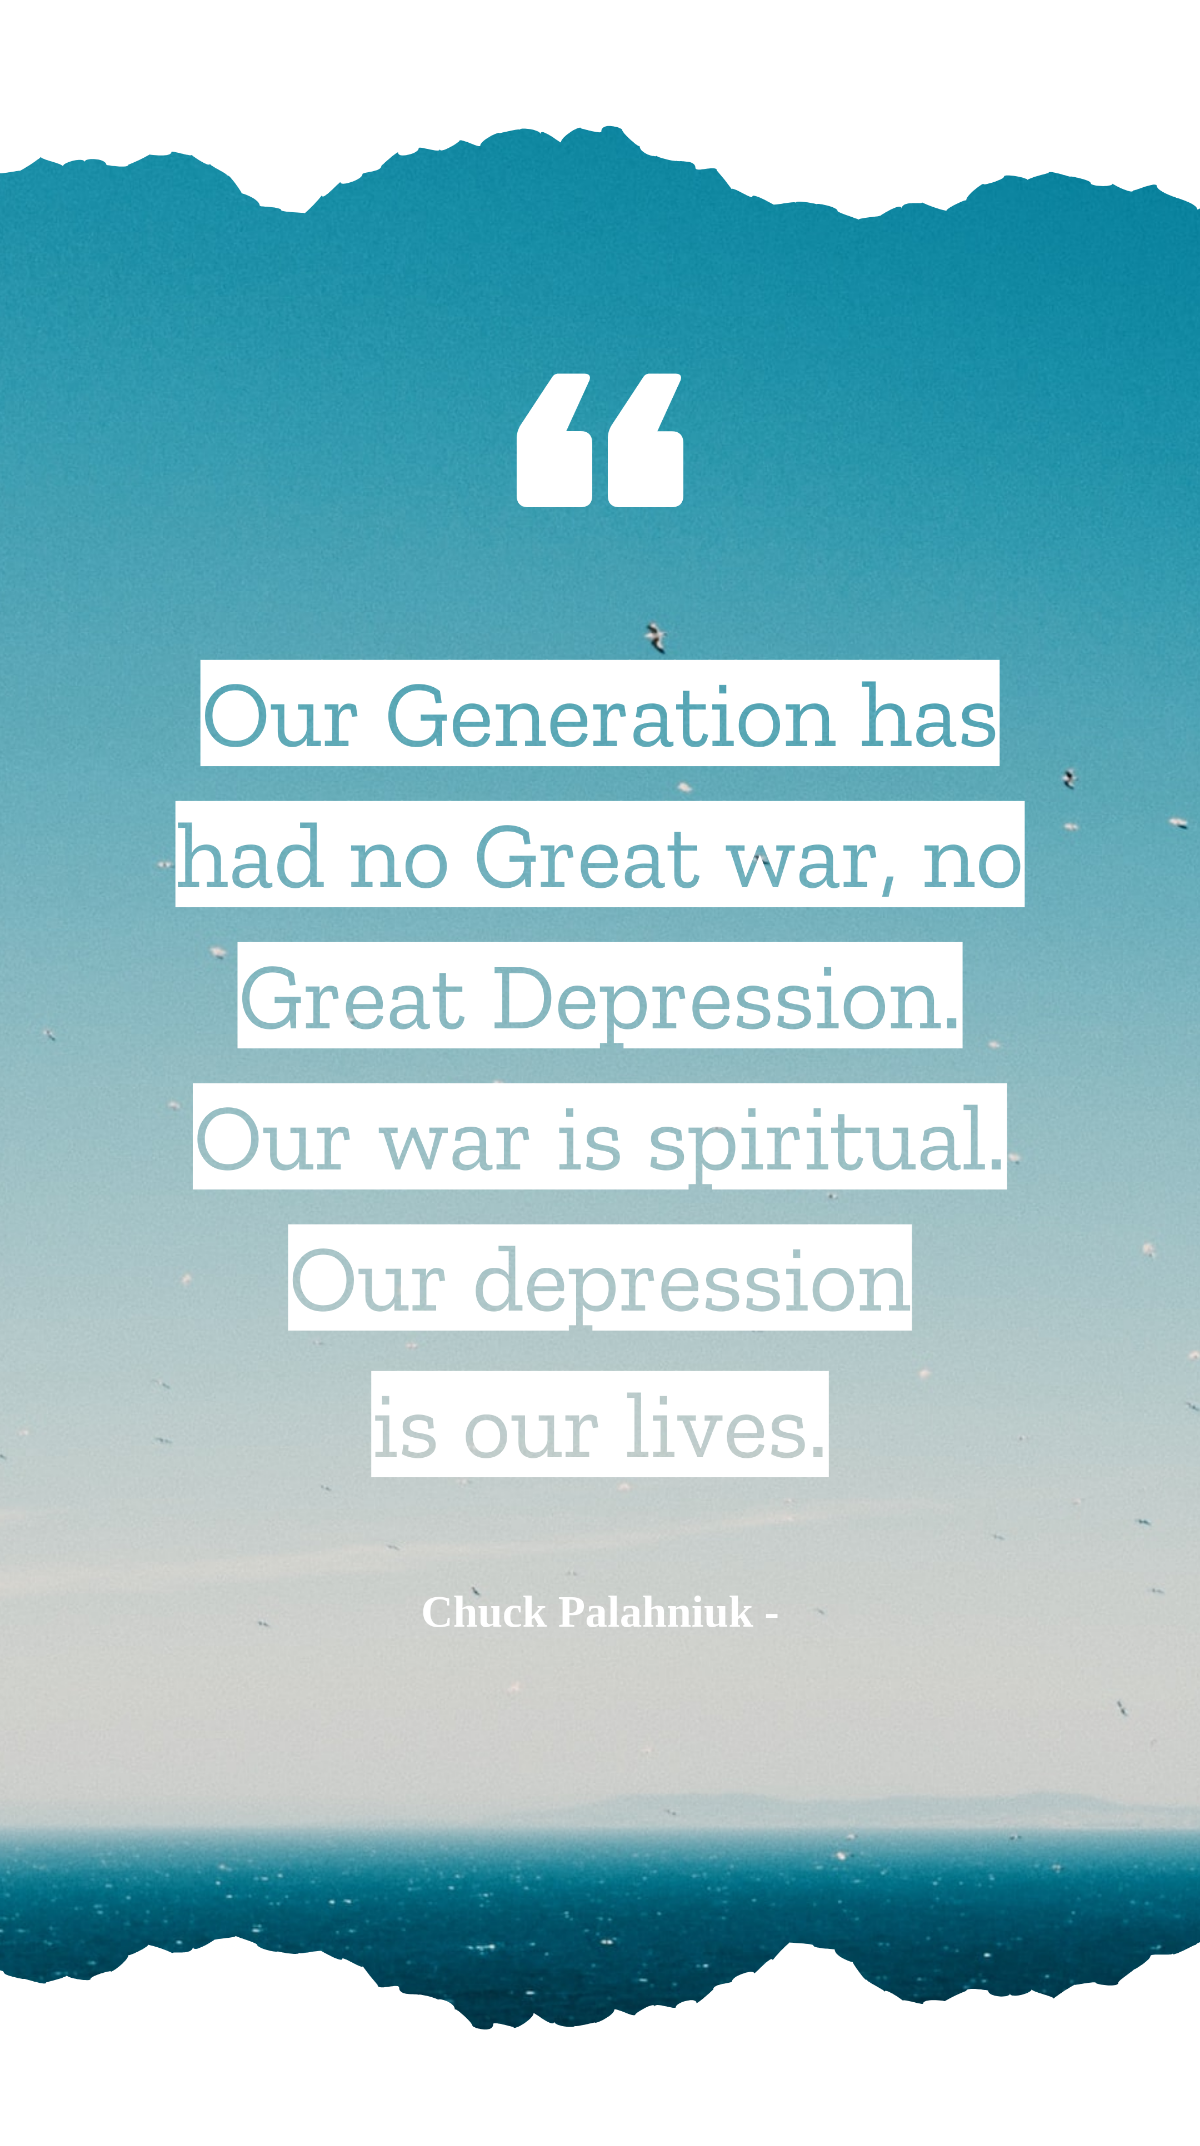 Chuck Palahniuk - Our Generation has had no Great war, no Great Depression. Our war is spiritual. Our depression is our lives. Template